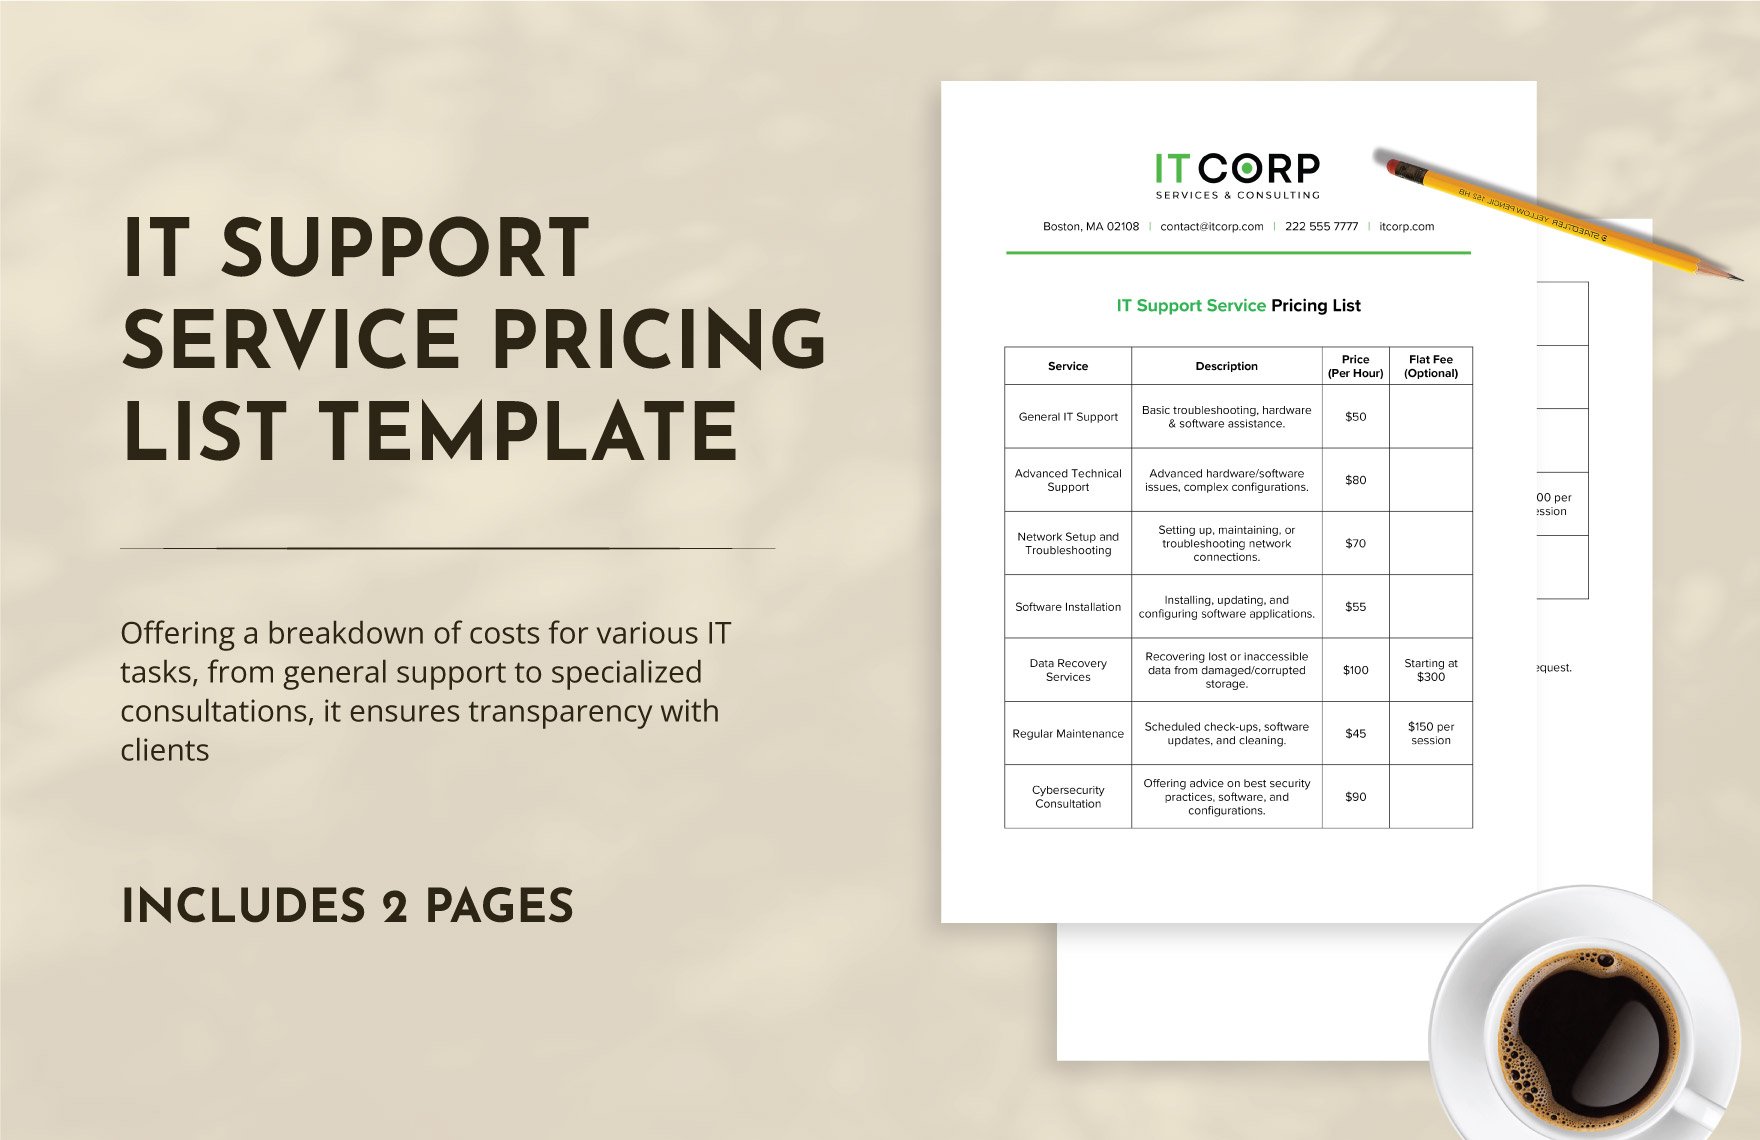 IT Support Service Pricing List Template